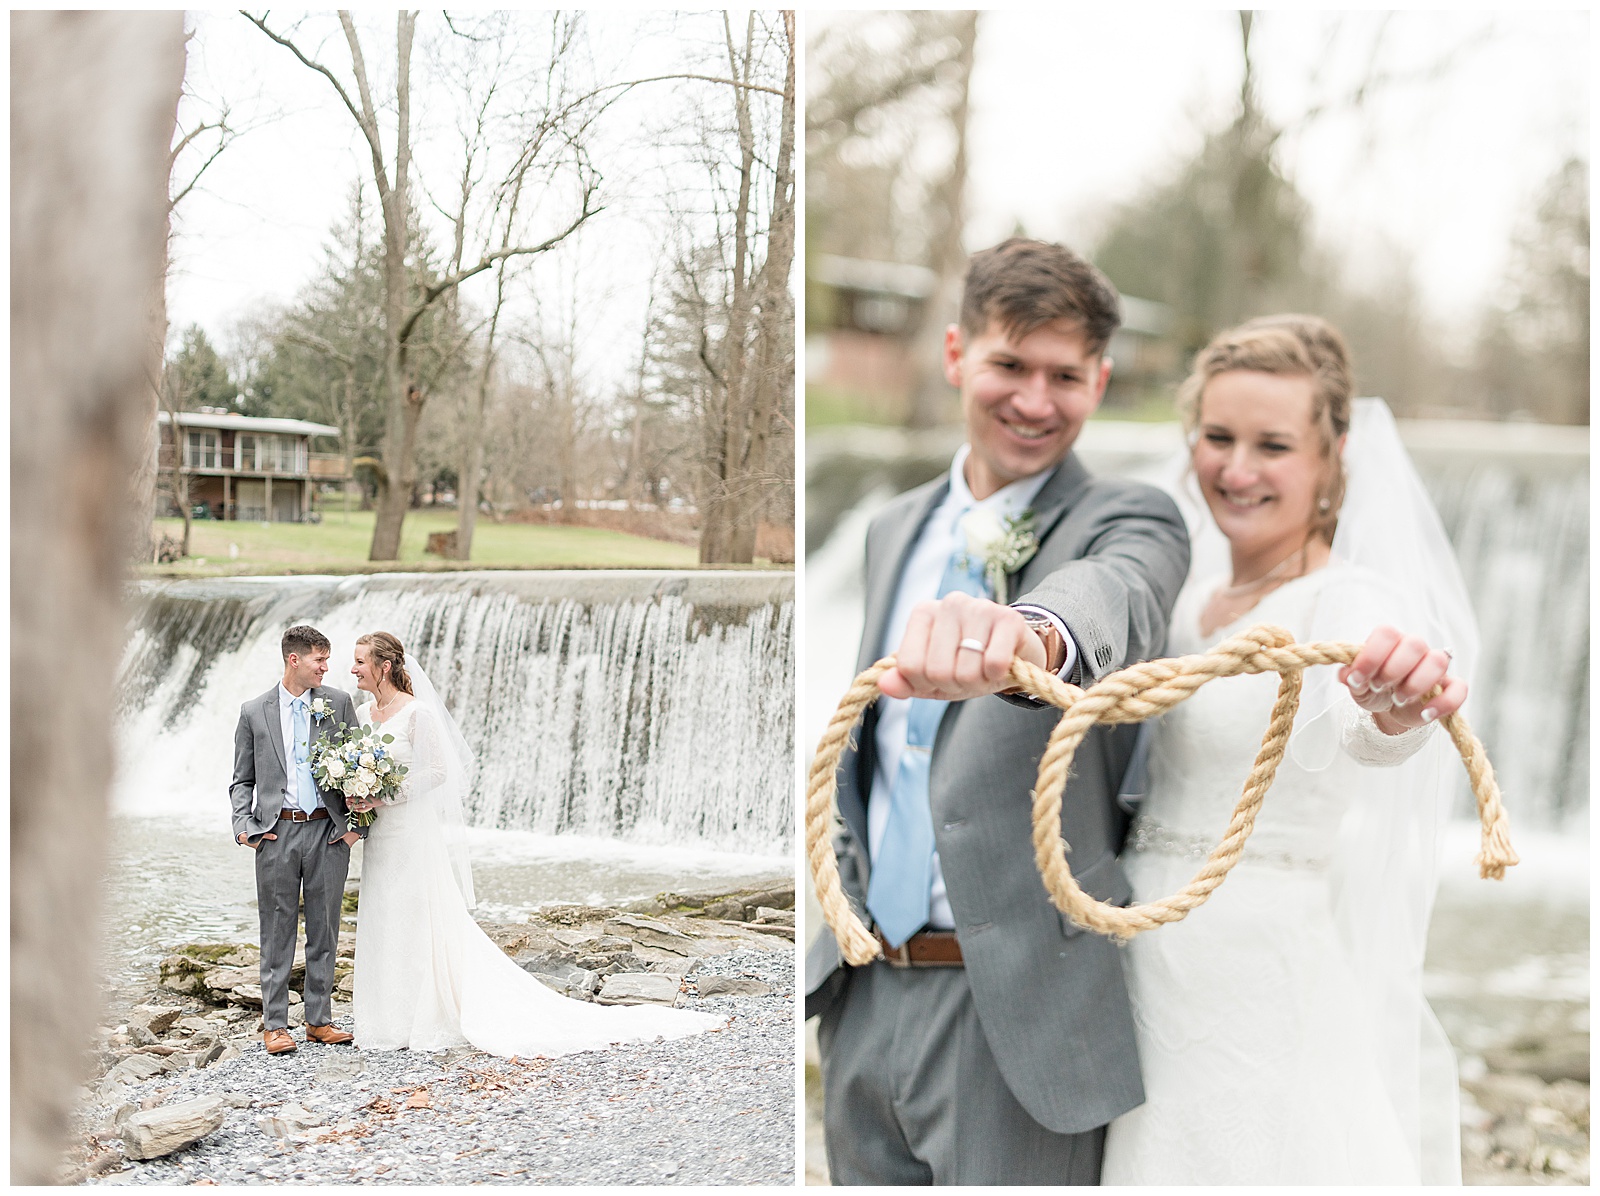 couple standing outdoors and displaying large rope being tied into a knot by them